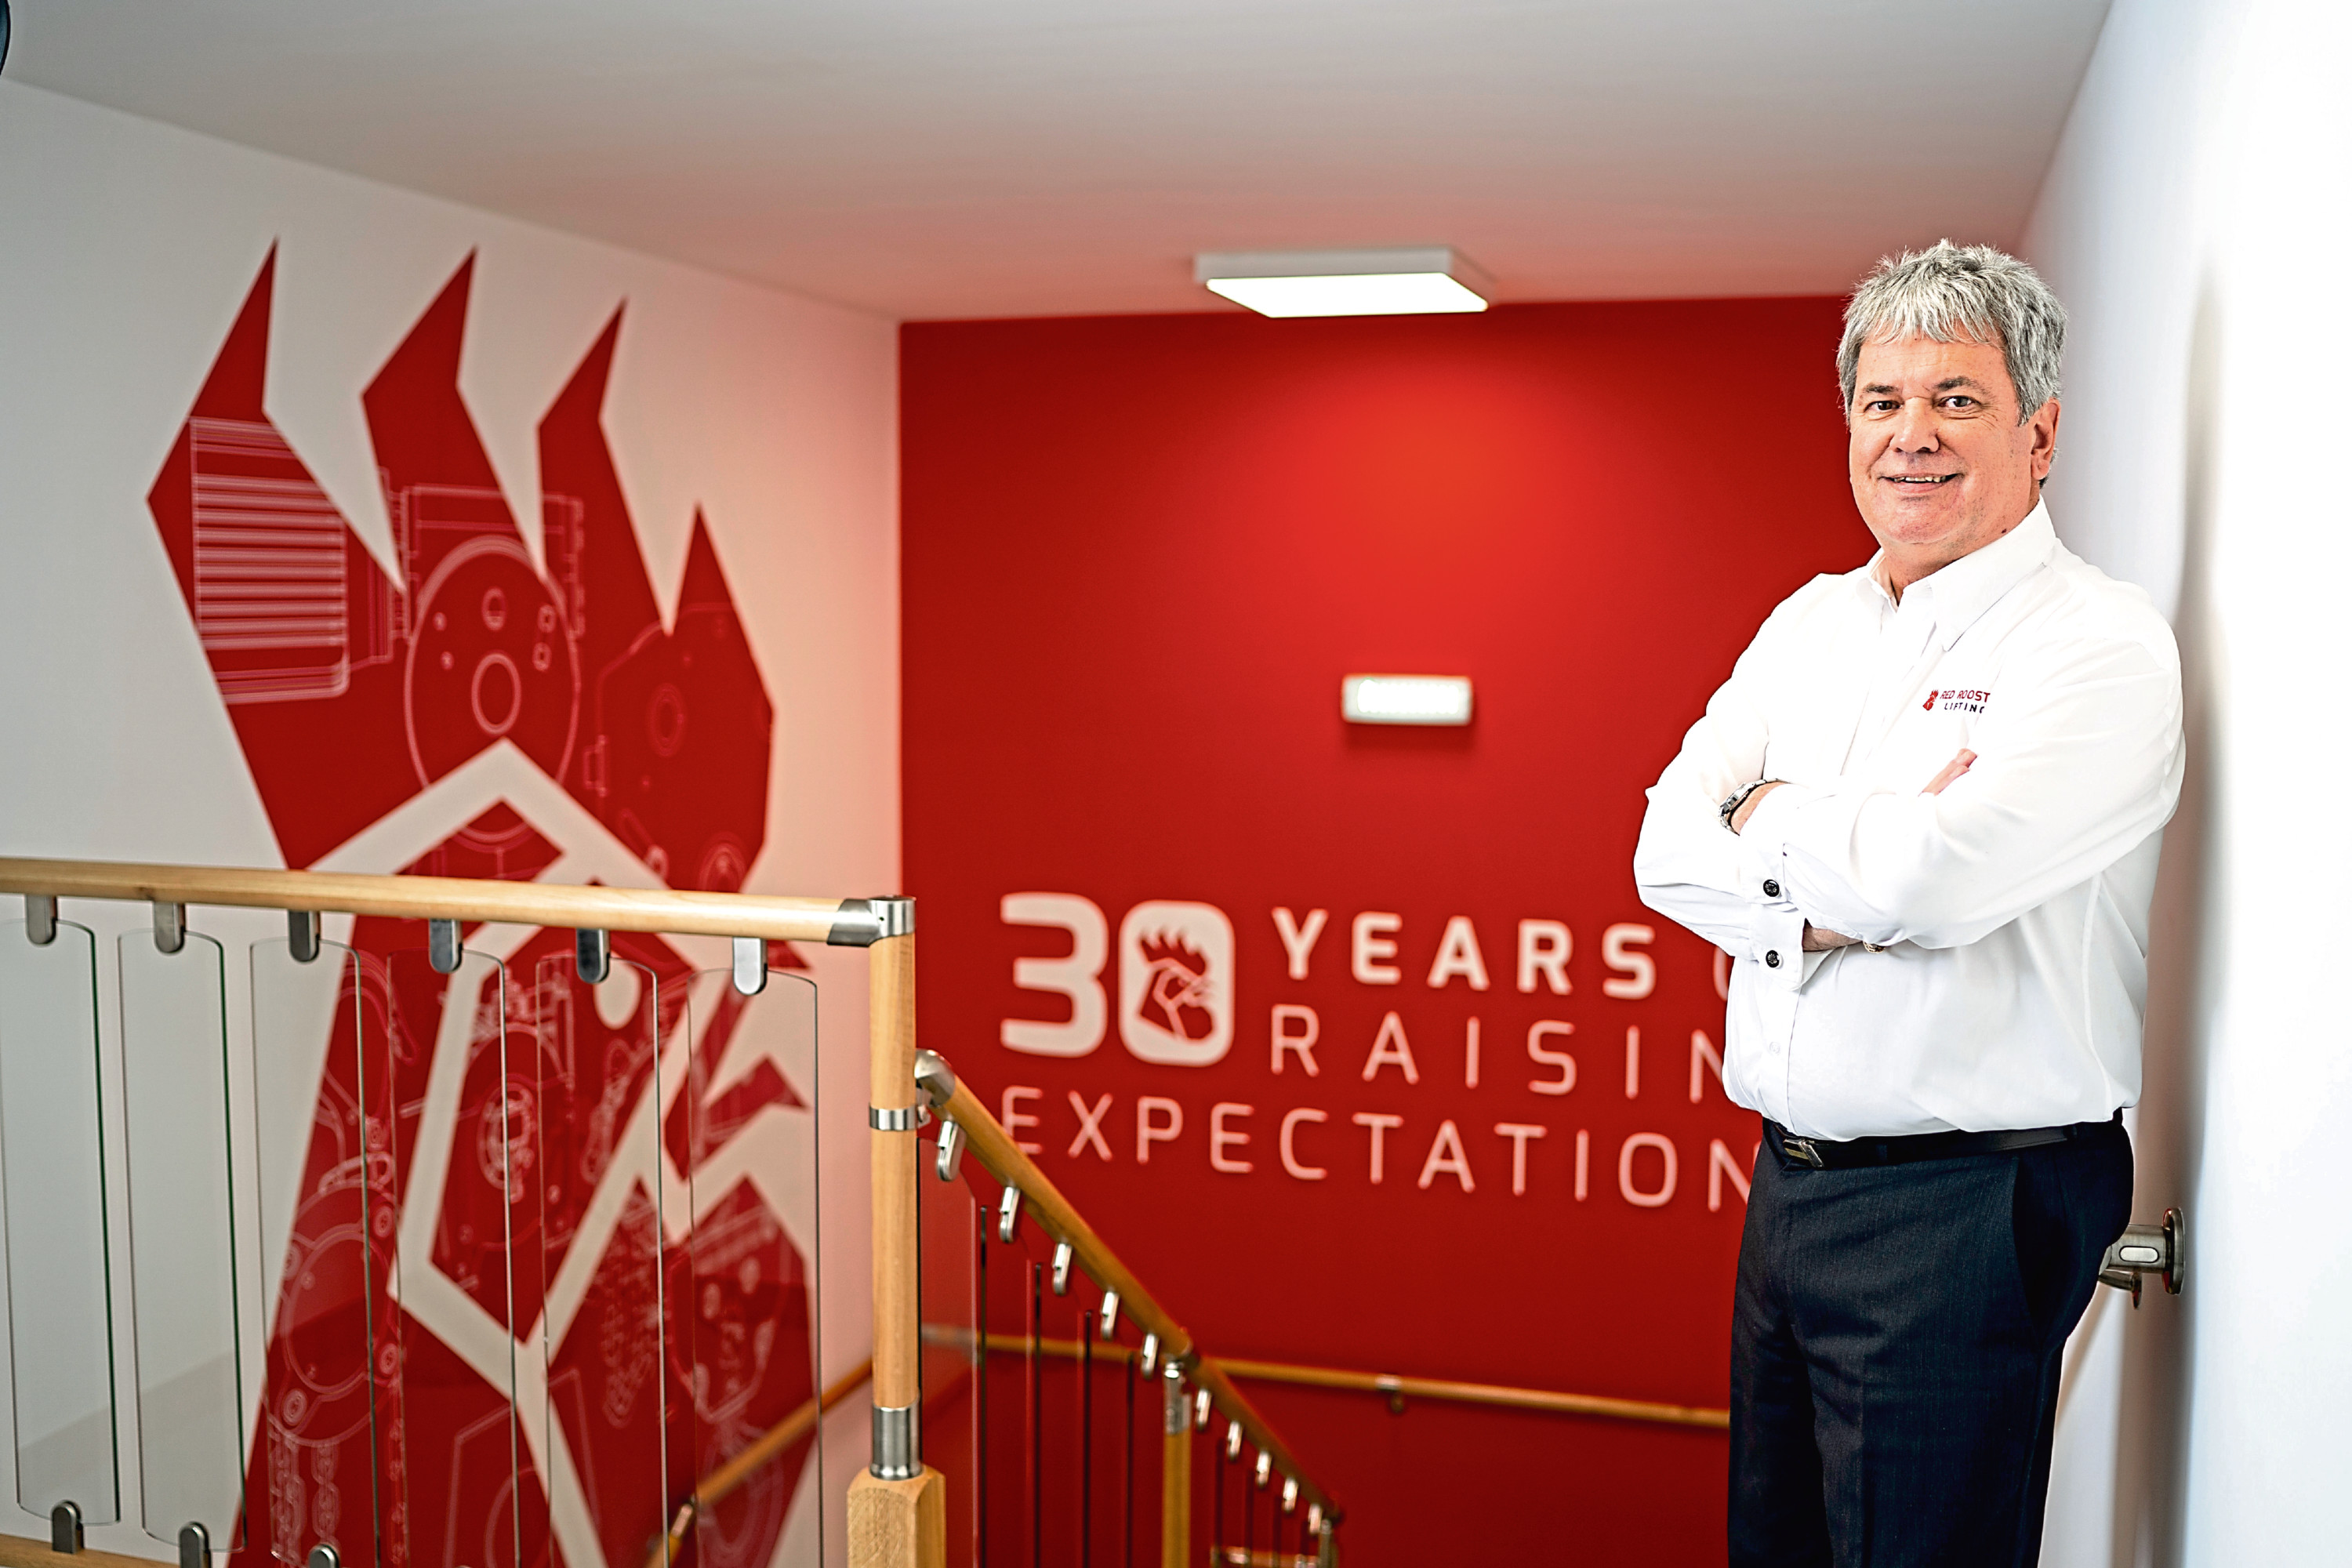 Red Rooster Lifting managing director Bil Aitken